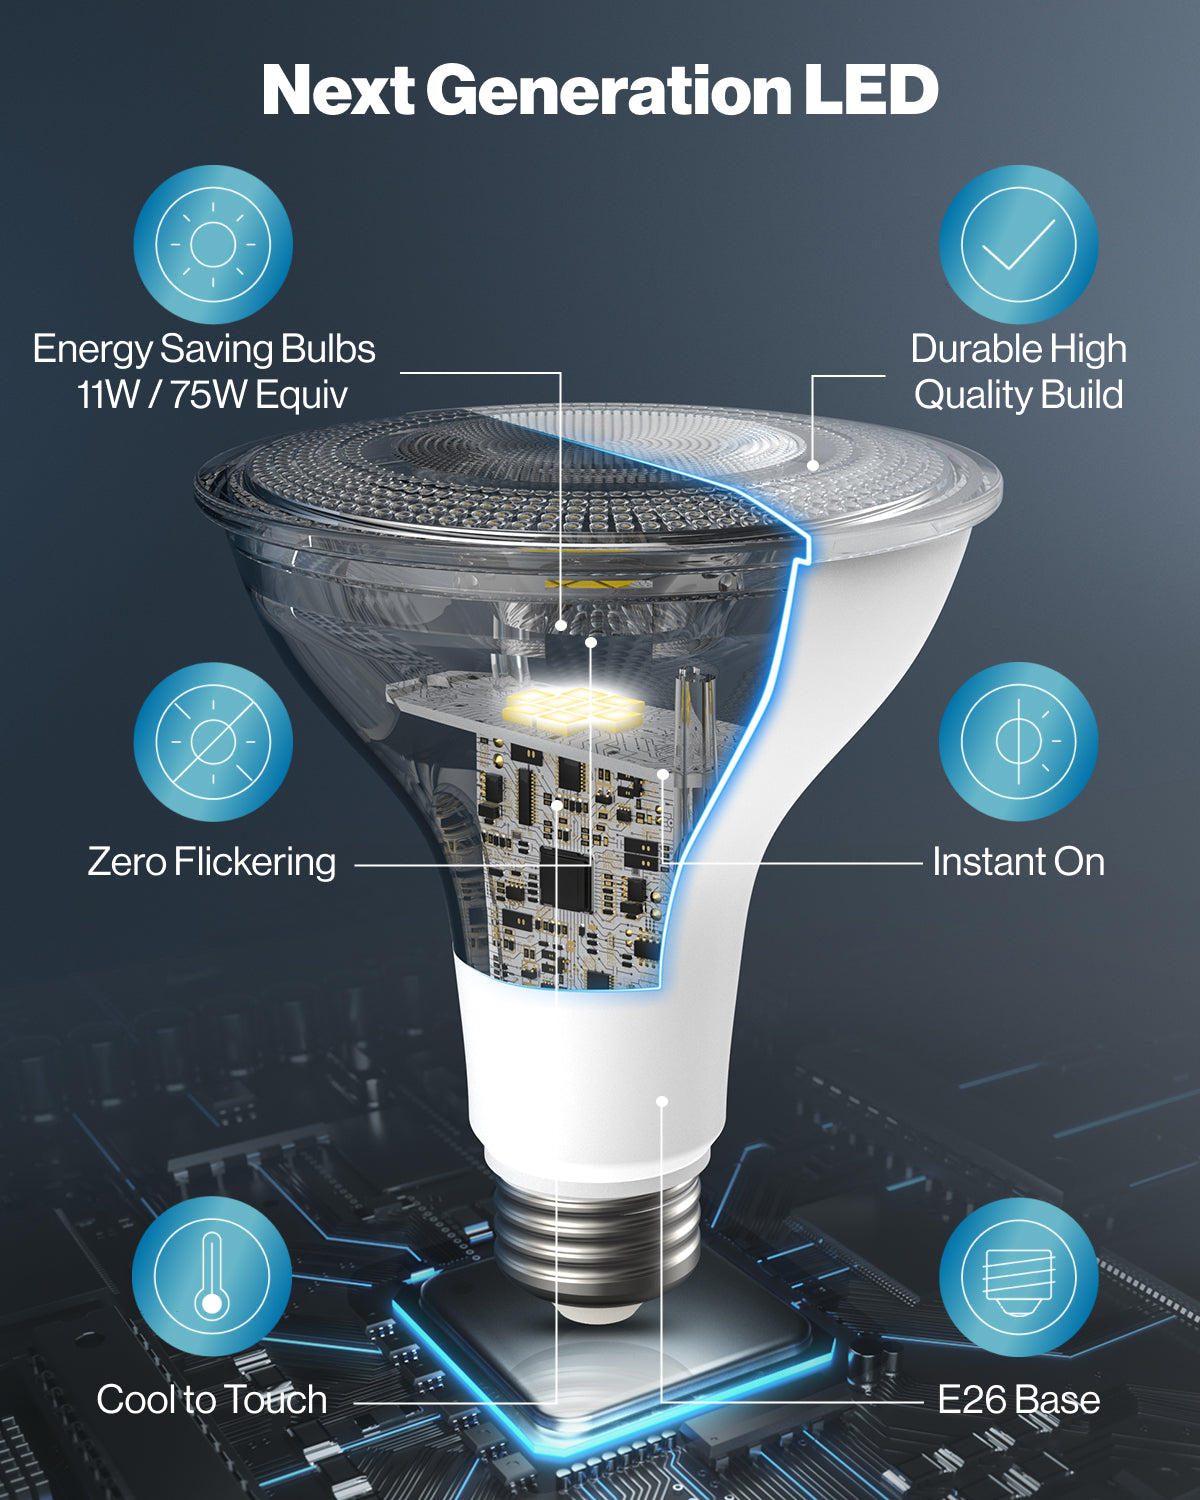 With their precise beam control and superior color rendering, PAR30 bulbs bring out the best in any setting.